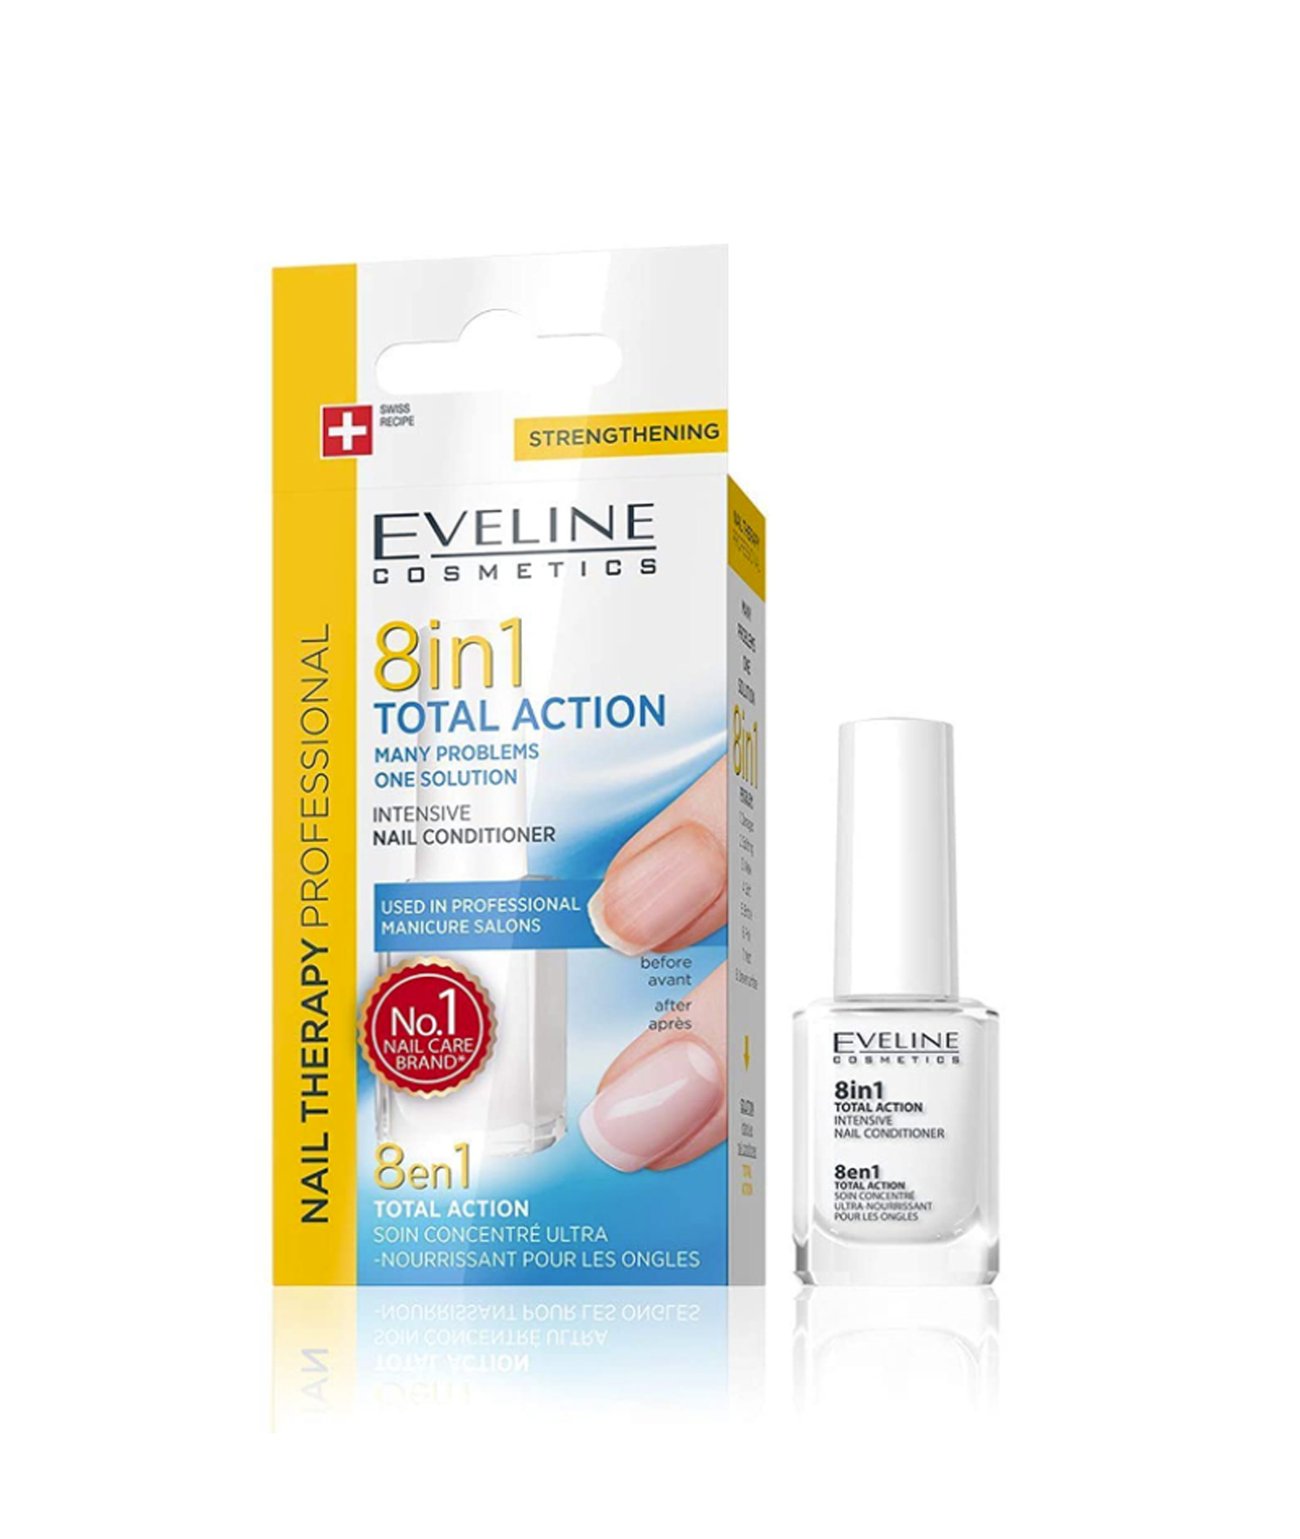 Eveline Cosmetics 8in1 Total Action